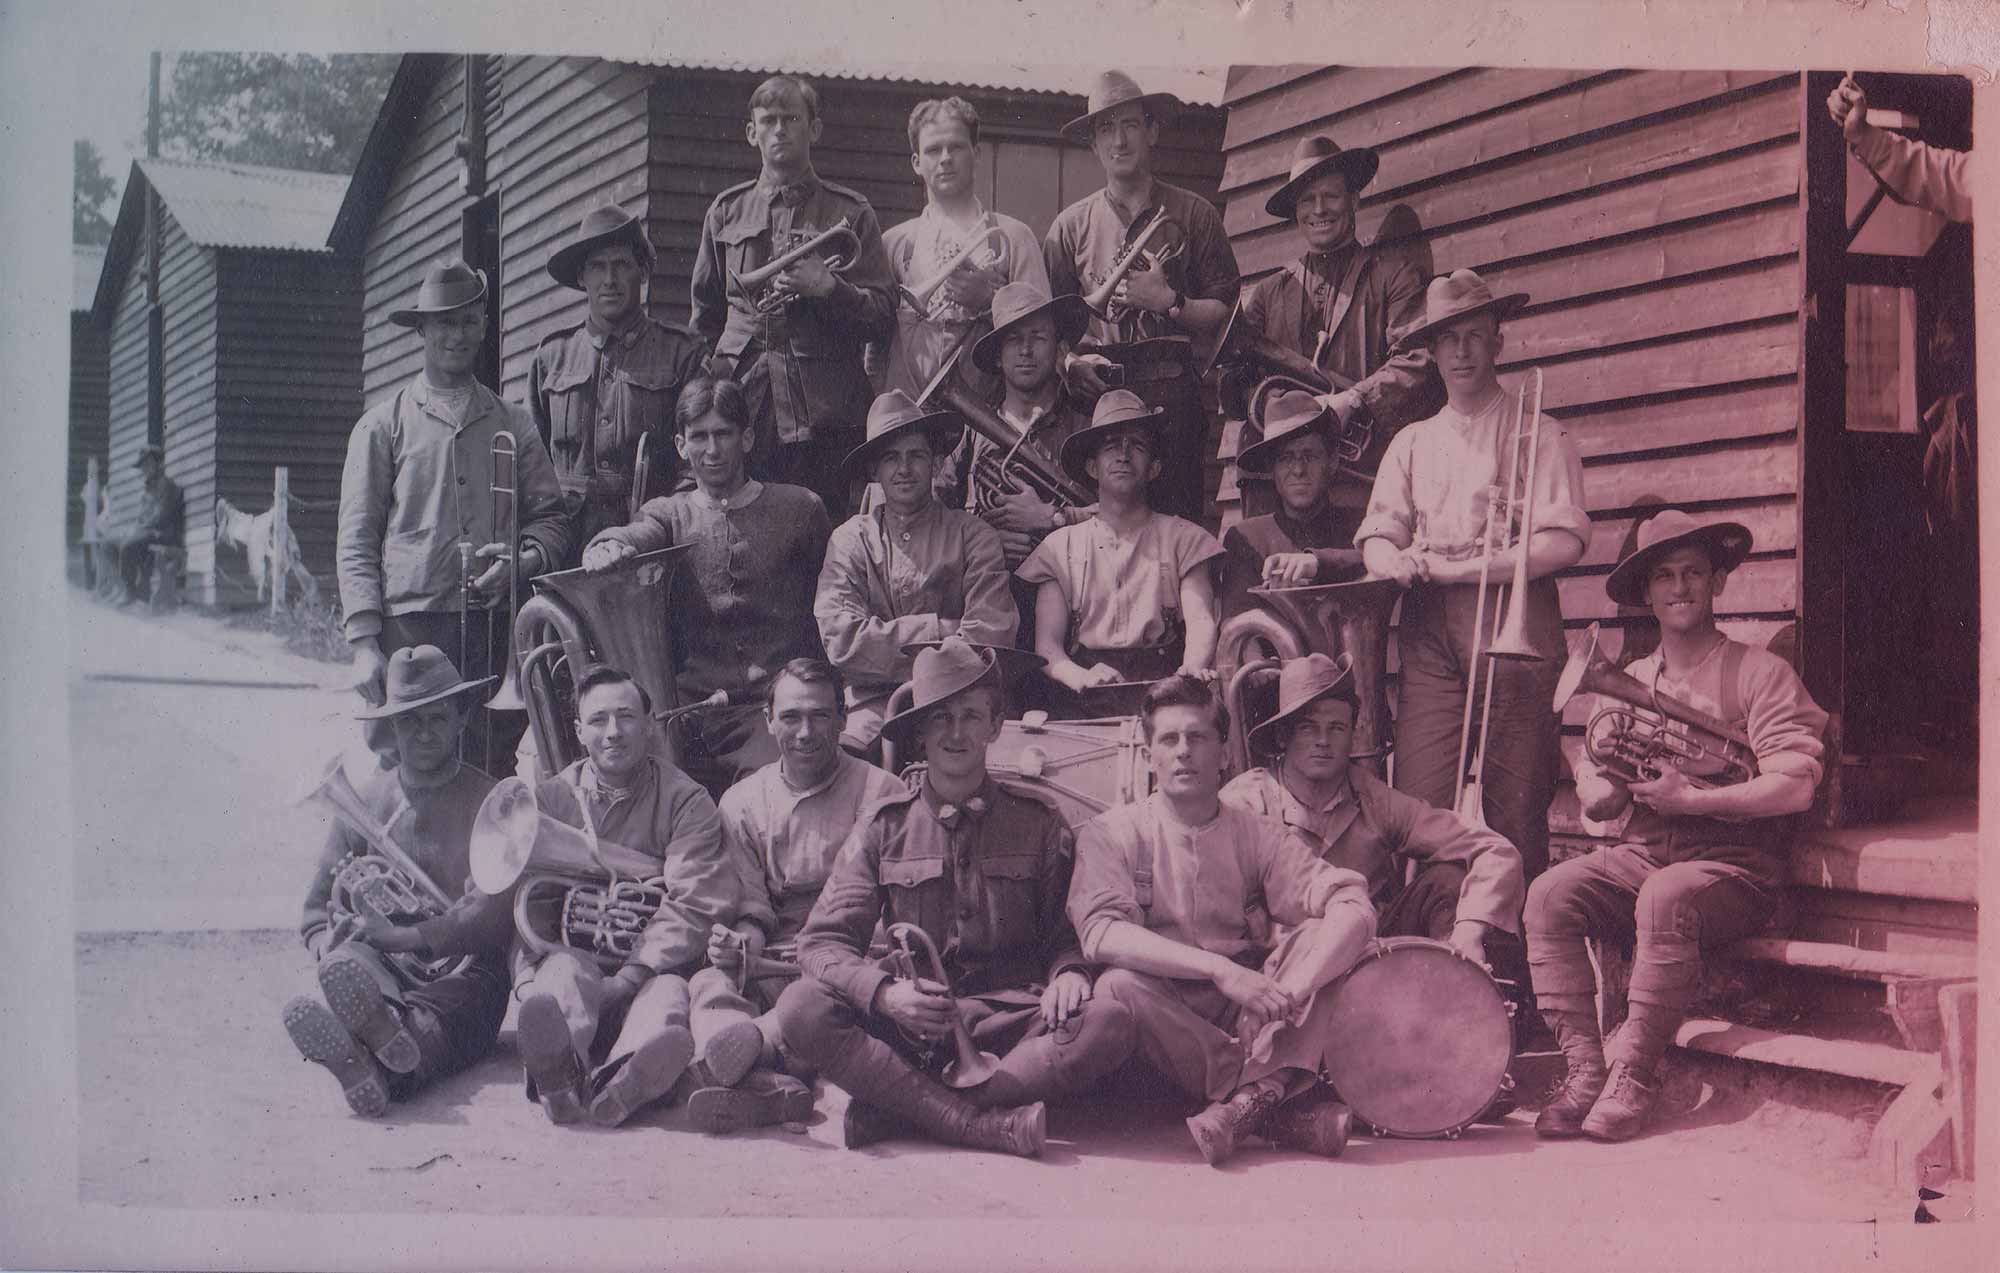 Members of the 21st Battalion Band